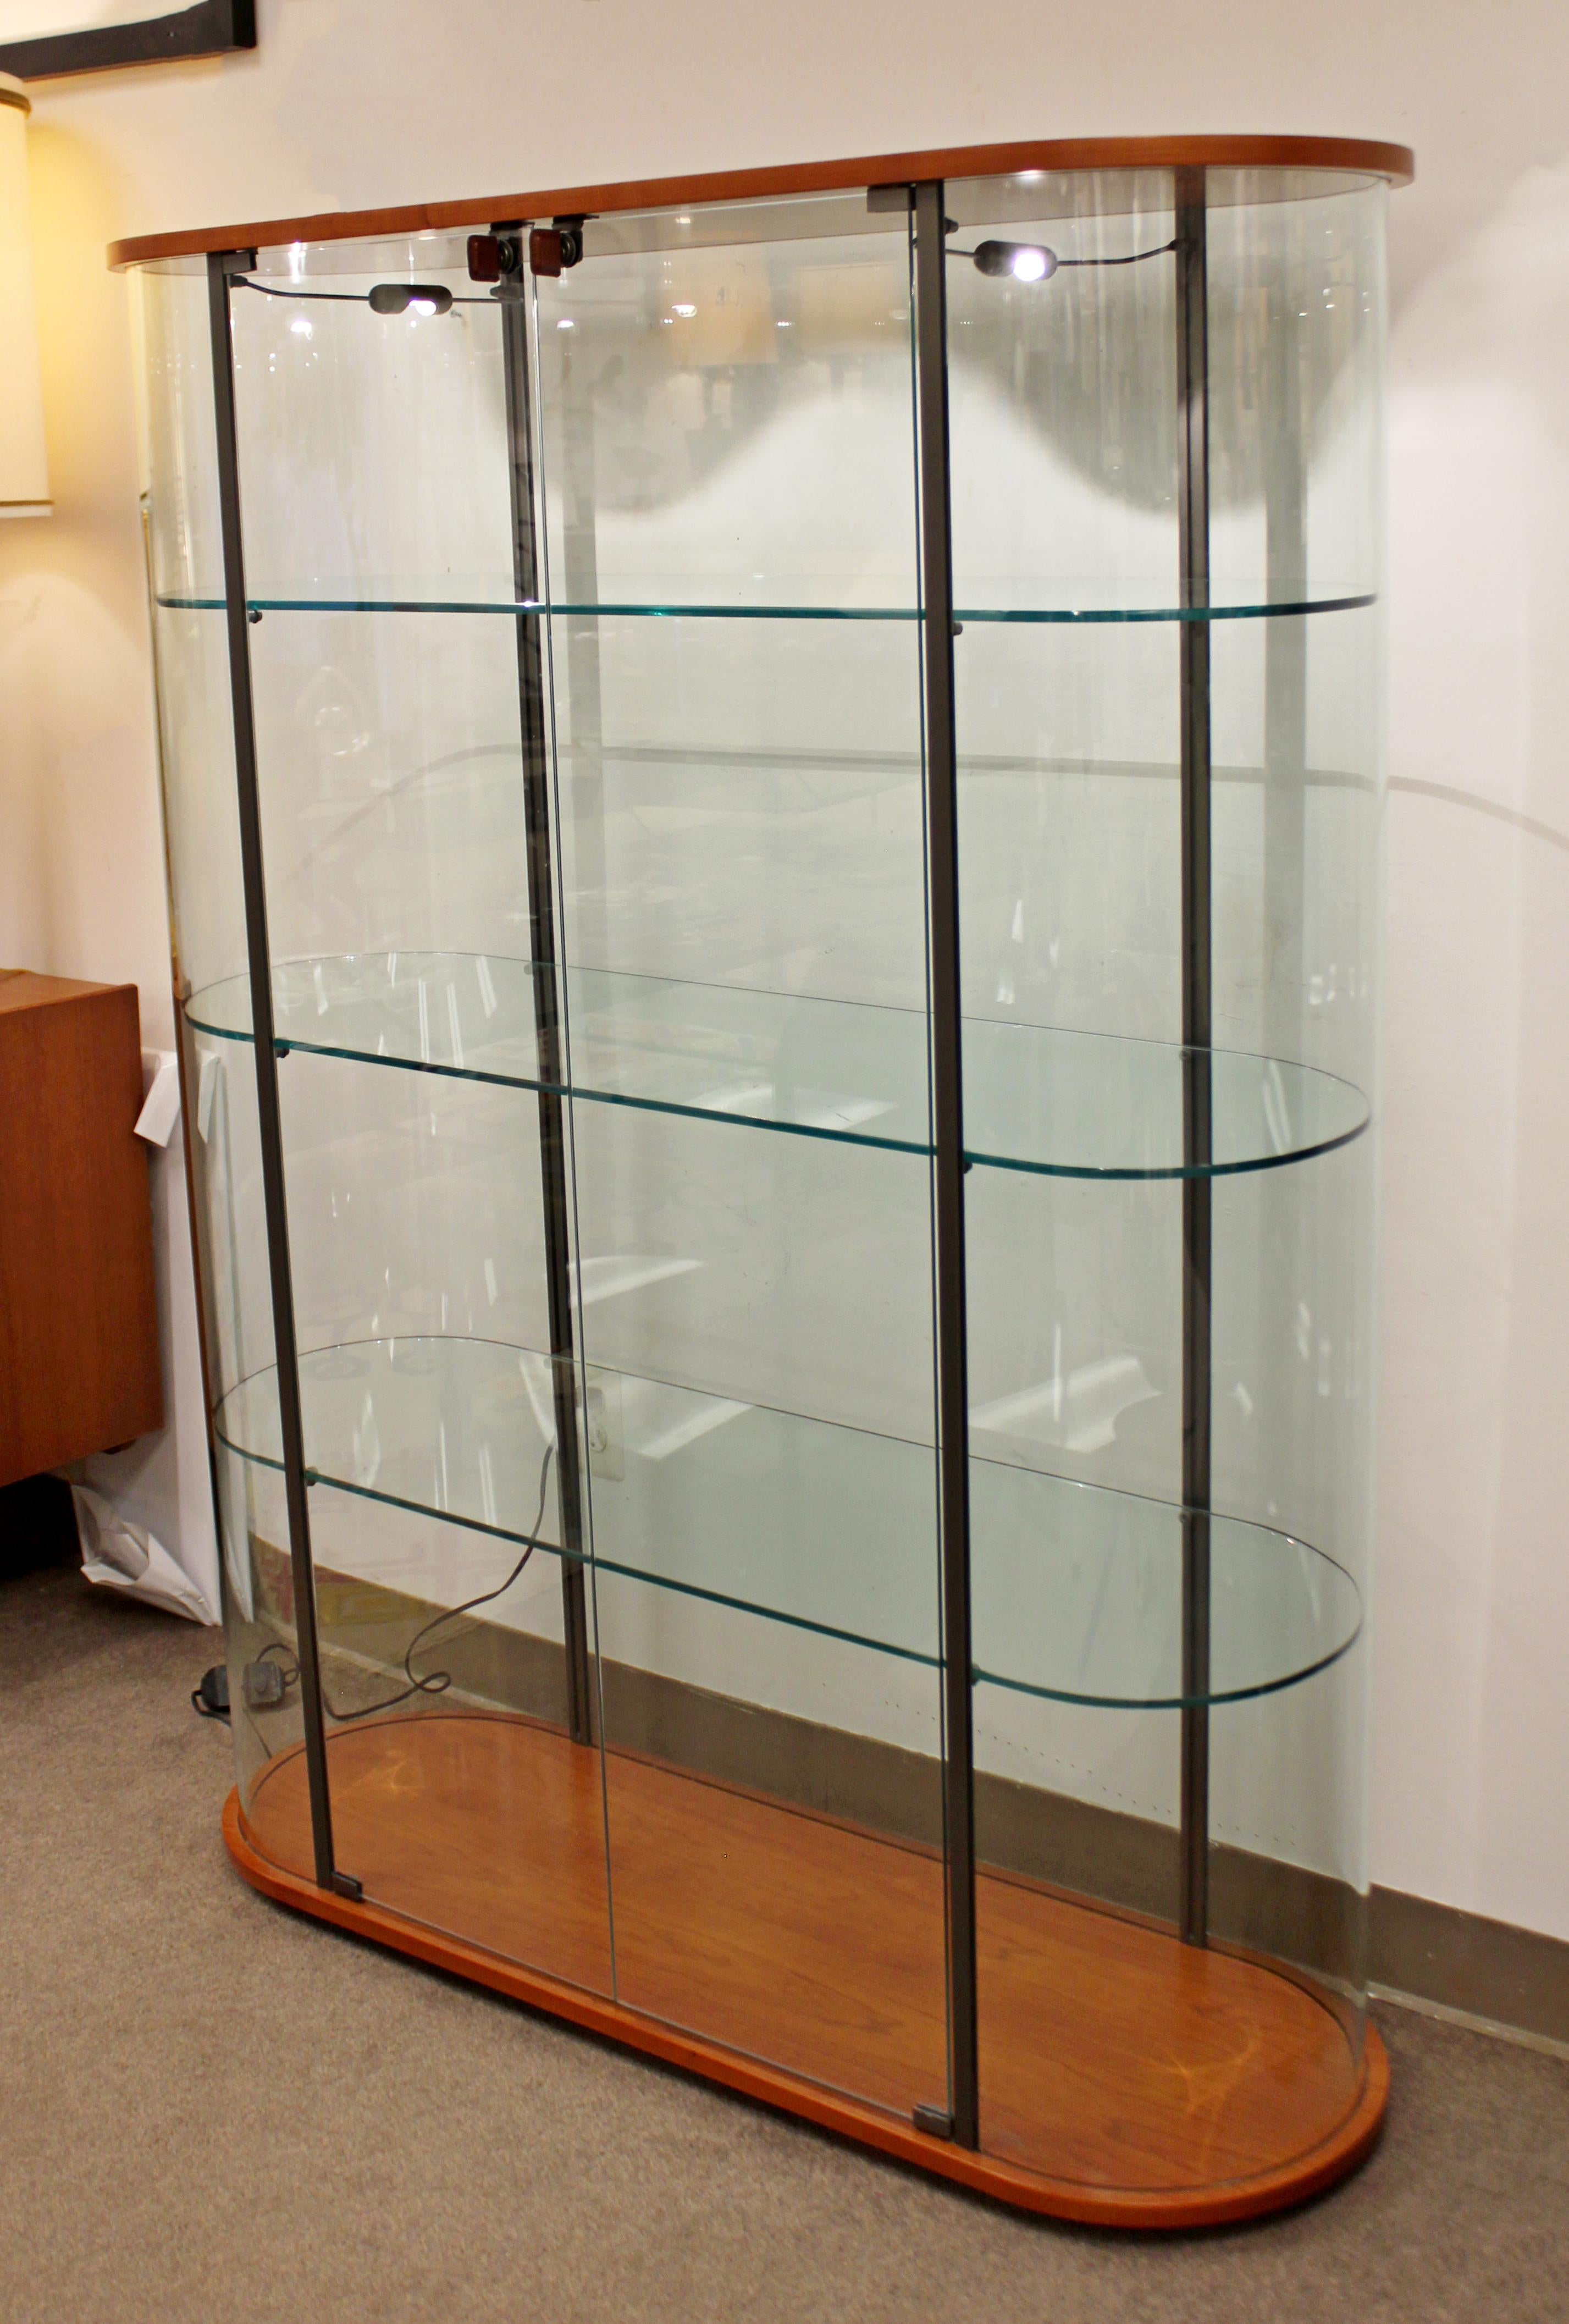 For your consideration is a beautiful light up shelving unit vitrine, with three glass shelves, and cherrywood, by Erre. In excellent condition. The dimensions are 46.5